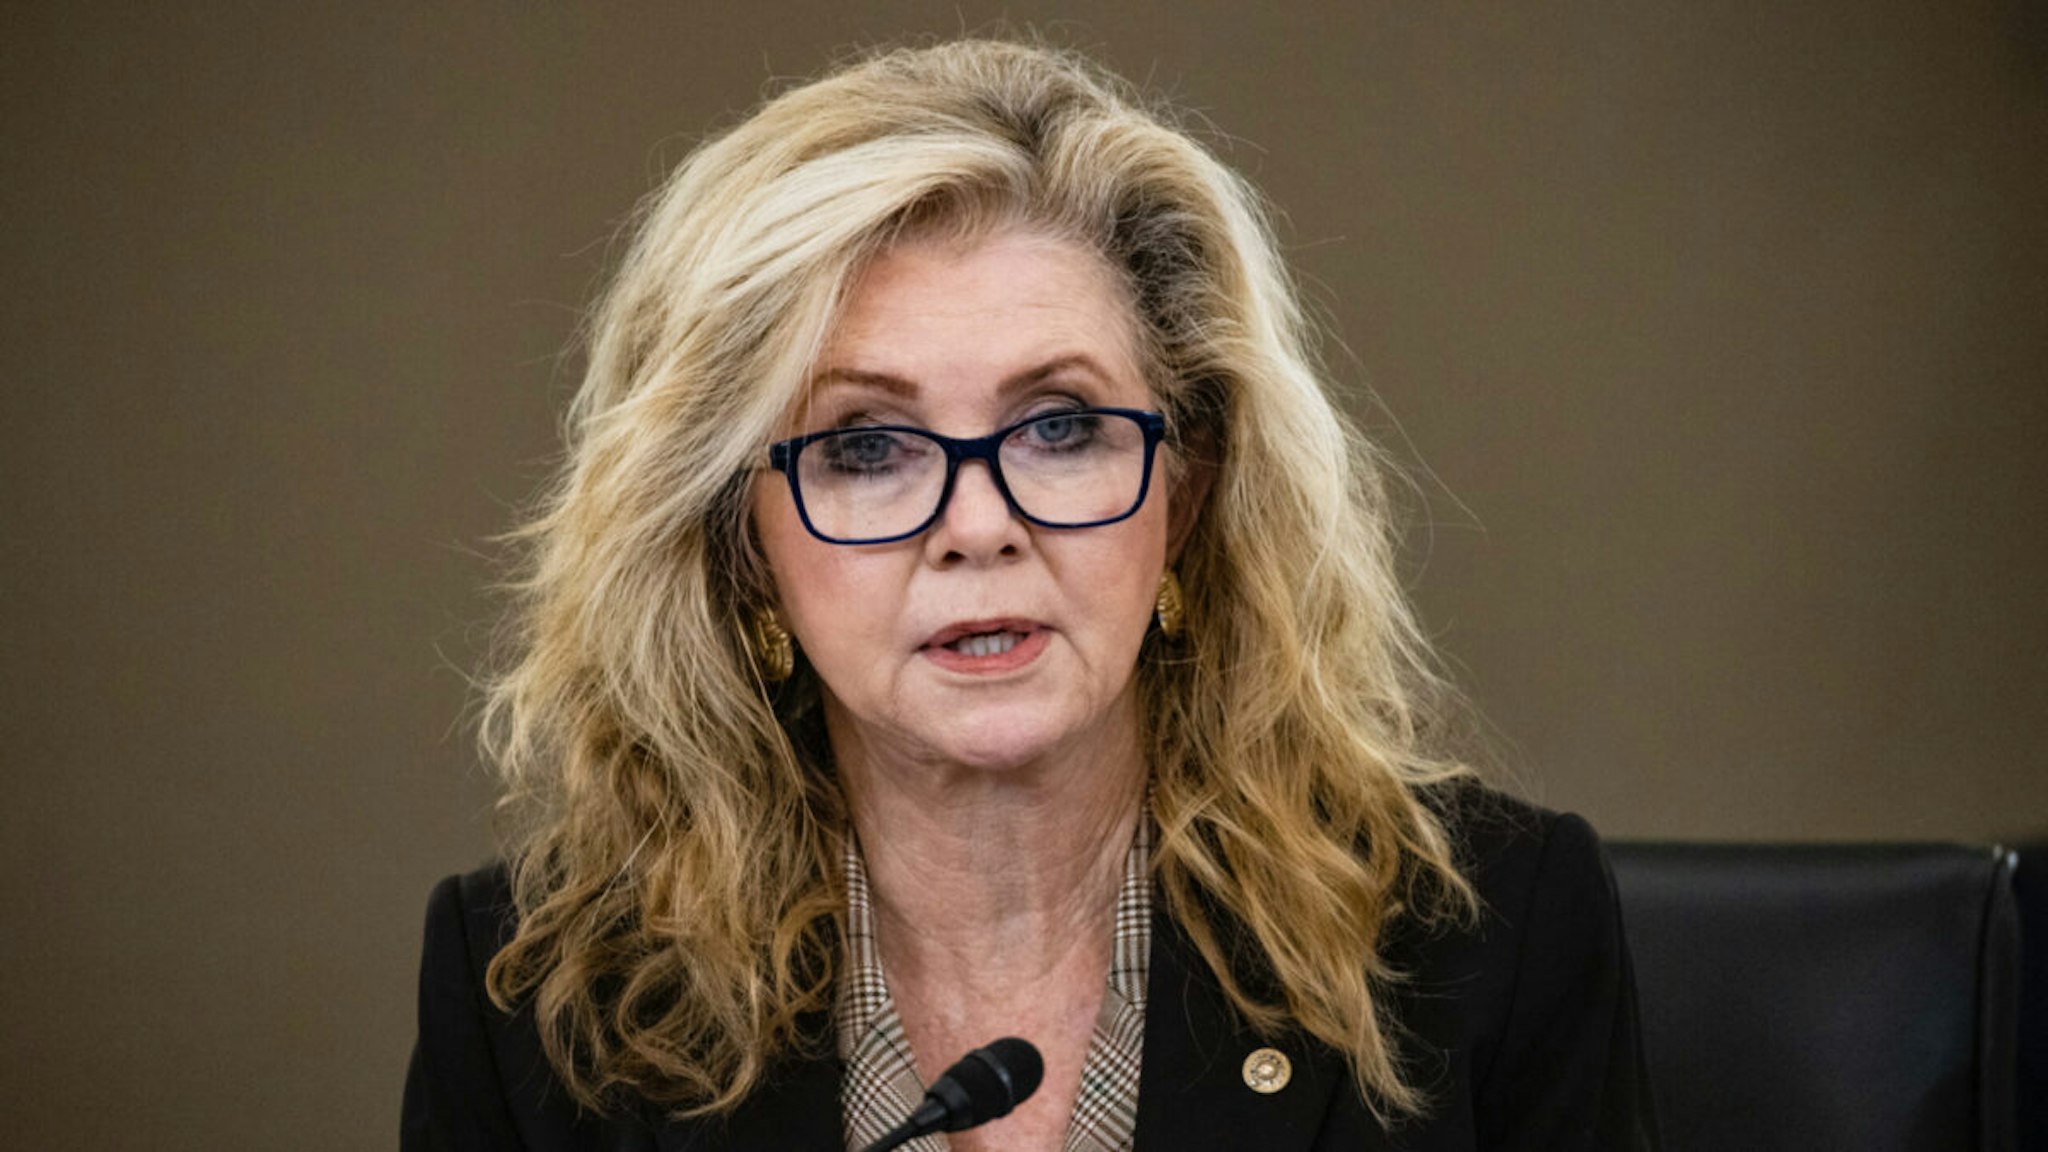 Ranking Member Sen. Marsha Blackburn (R-TN) speaks during a Senate Subcommittee on Consumer Protection, Product Safety, and Data Security hearing on Protecting Kids Online: Snapchat, TikTok, and YouTube on October 26, 2021 in Washington, DC.